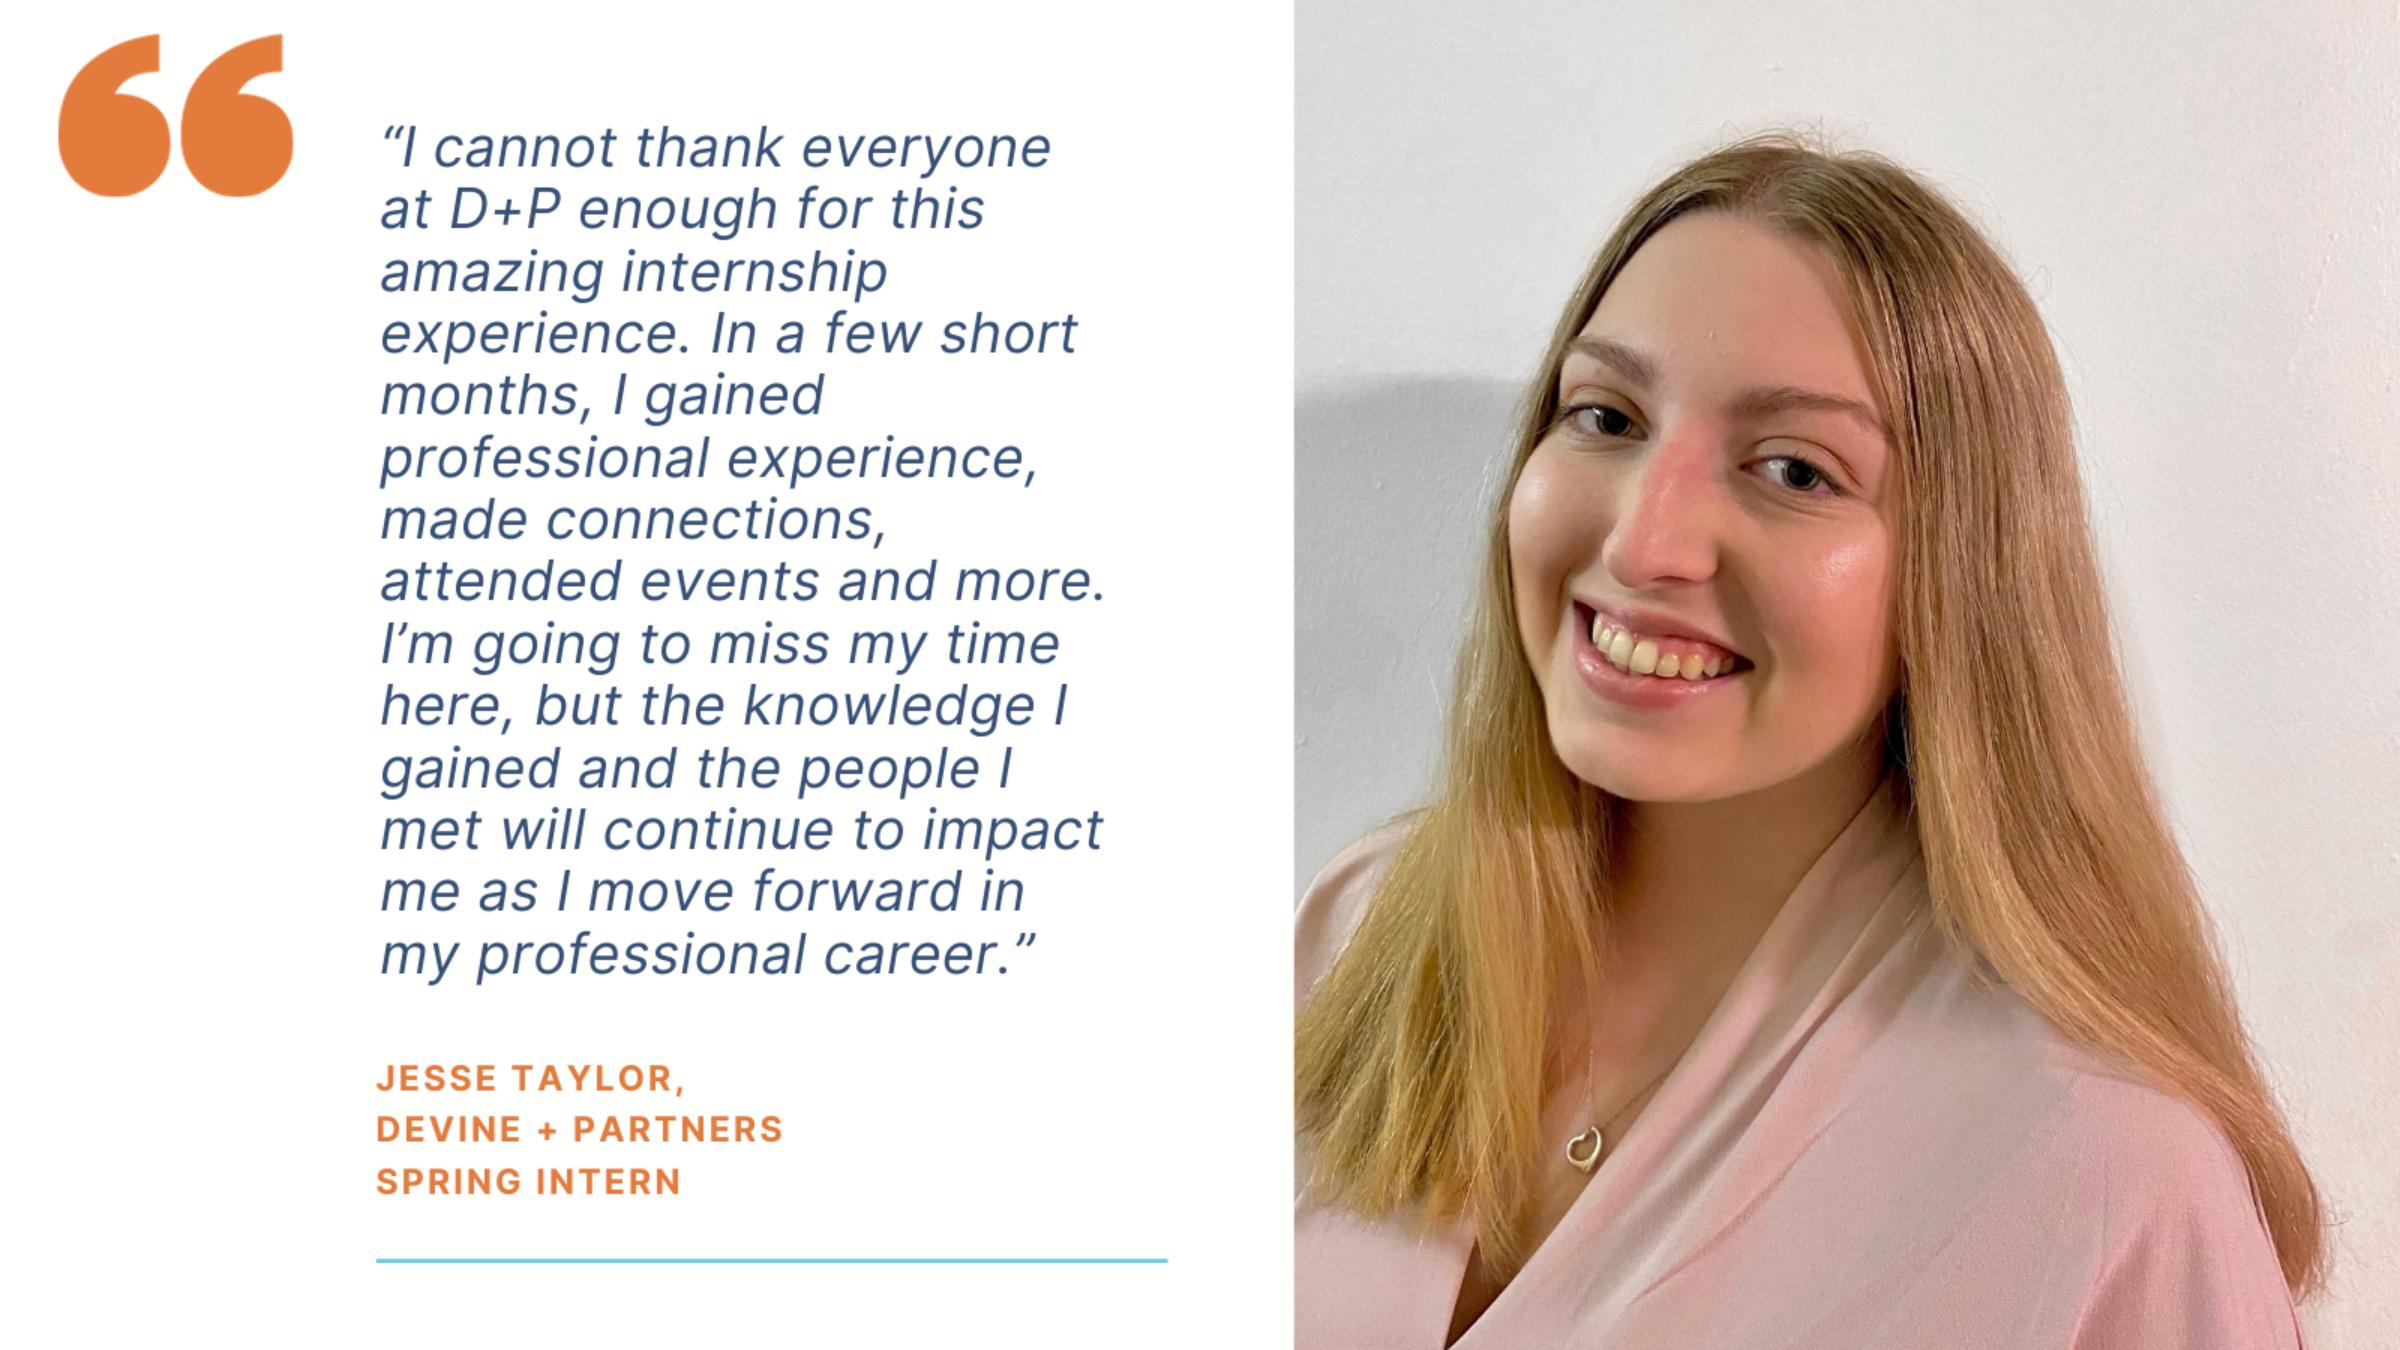 Head shot of public relations intern Jesse Taylor next to a quote about her experience as a Devine + Partner Intern